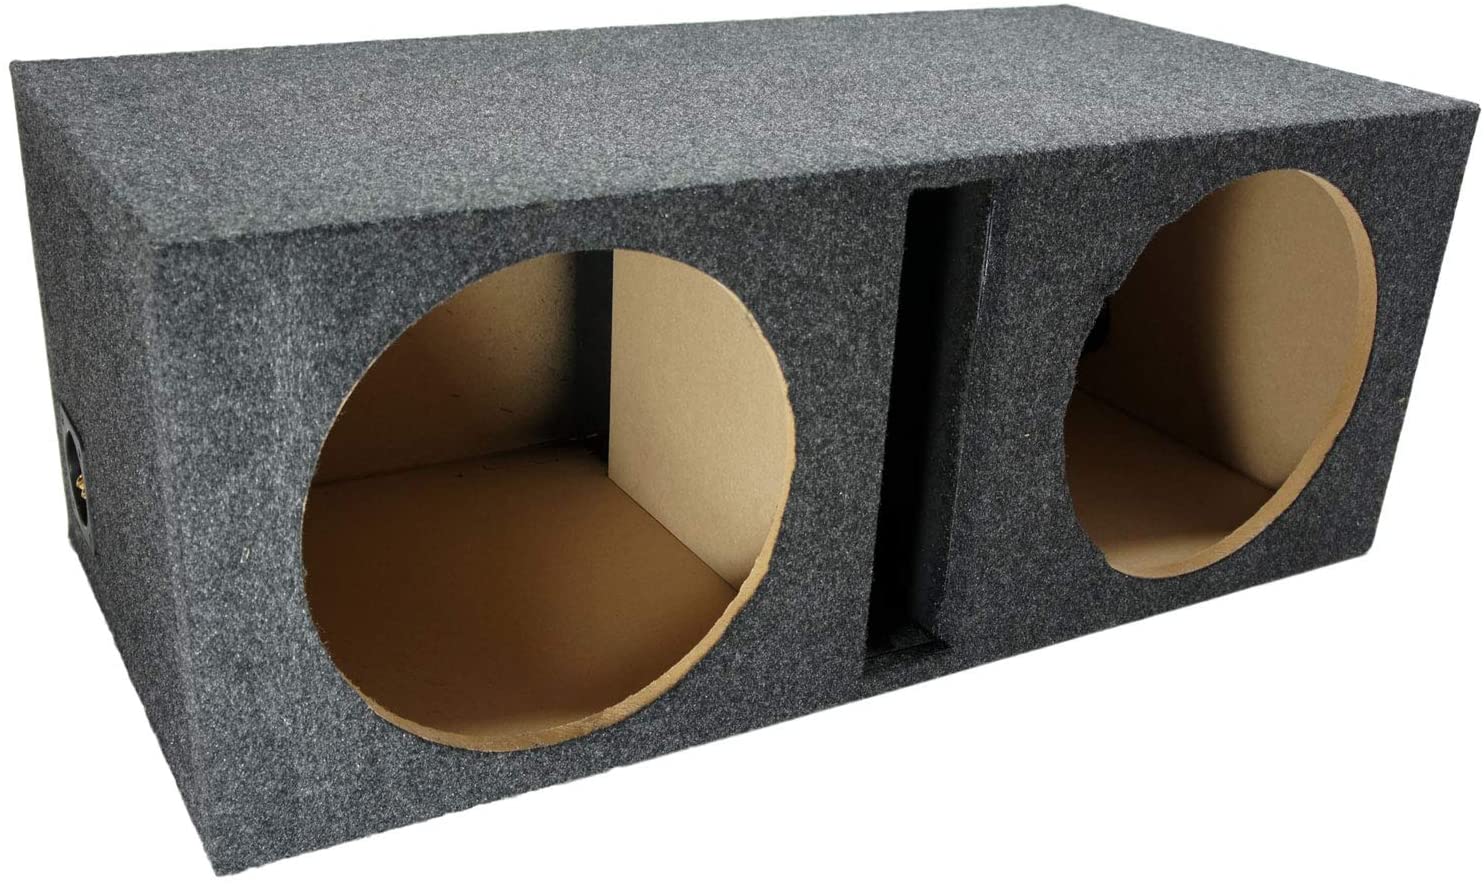 Car Audio Dual 12â€³ Vented Subwoofer Stereo Sub Box (Best Subwoofer Box for Deep Bass):